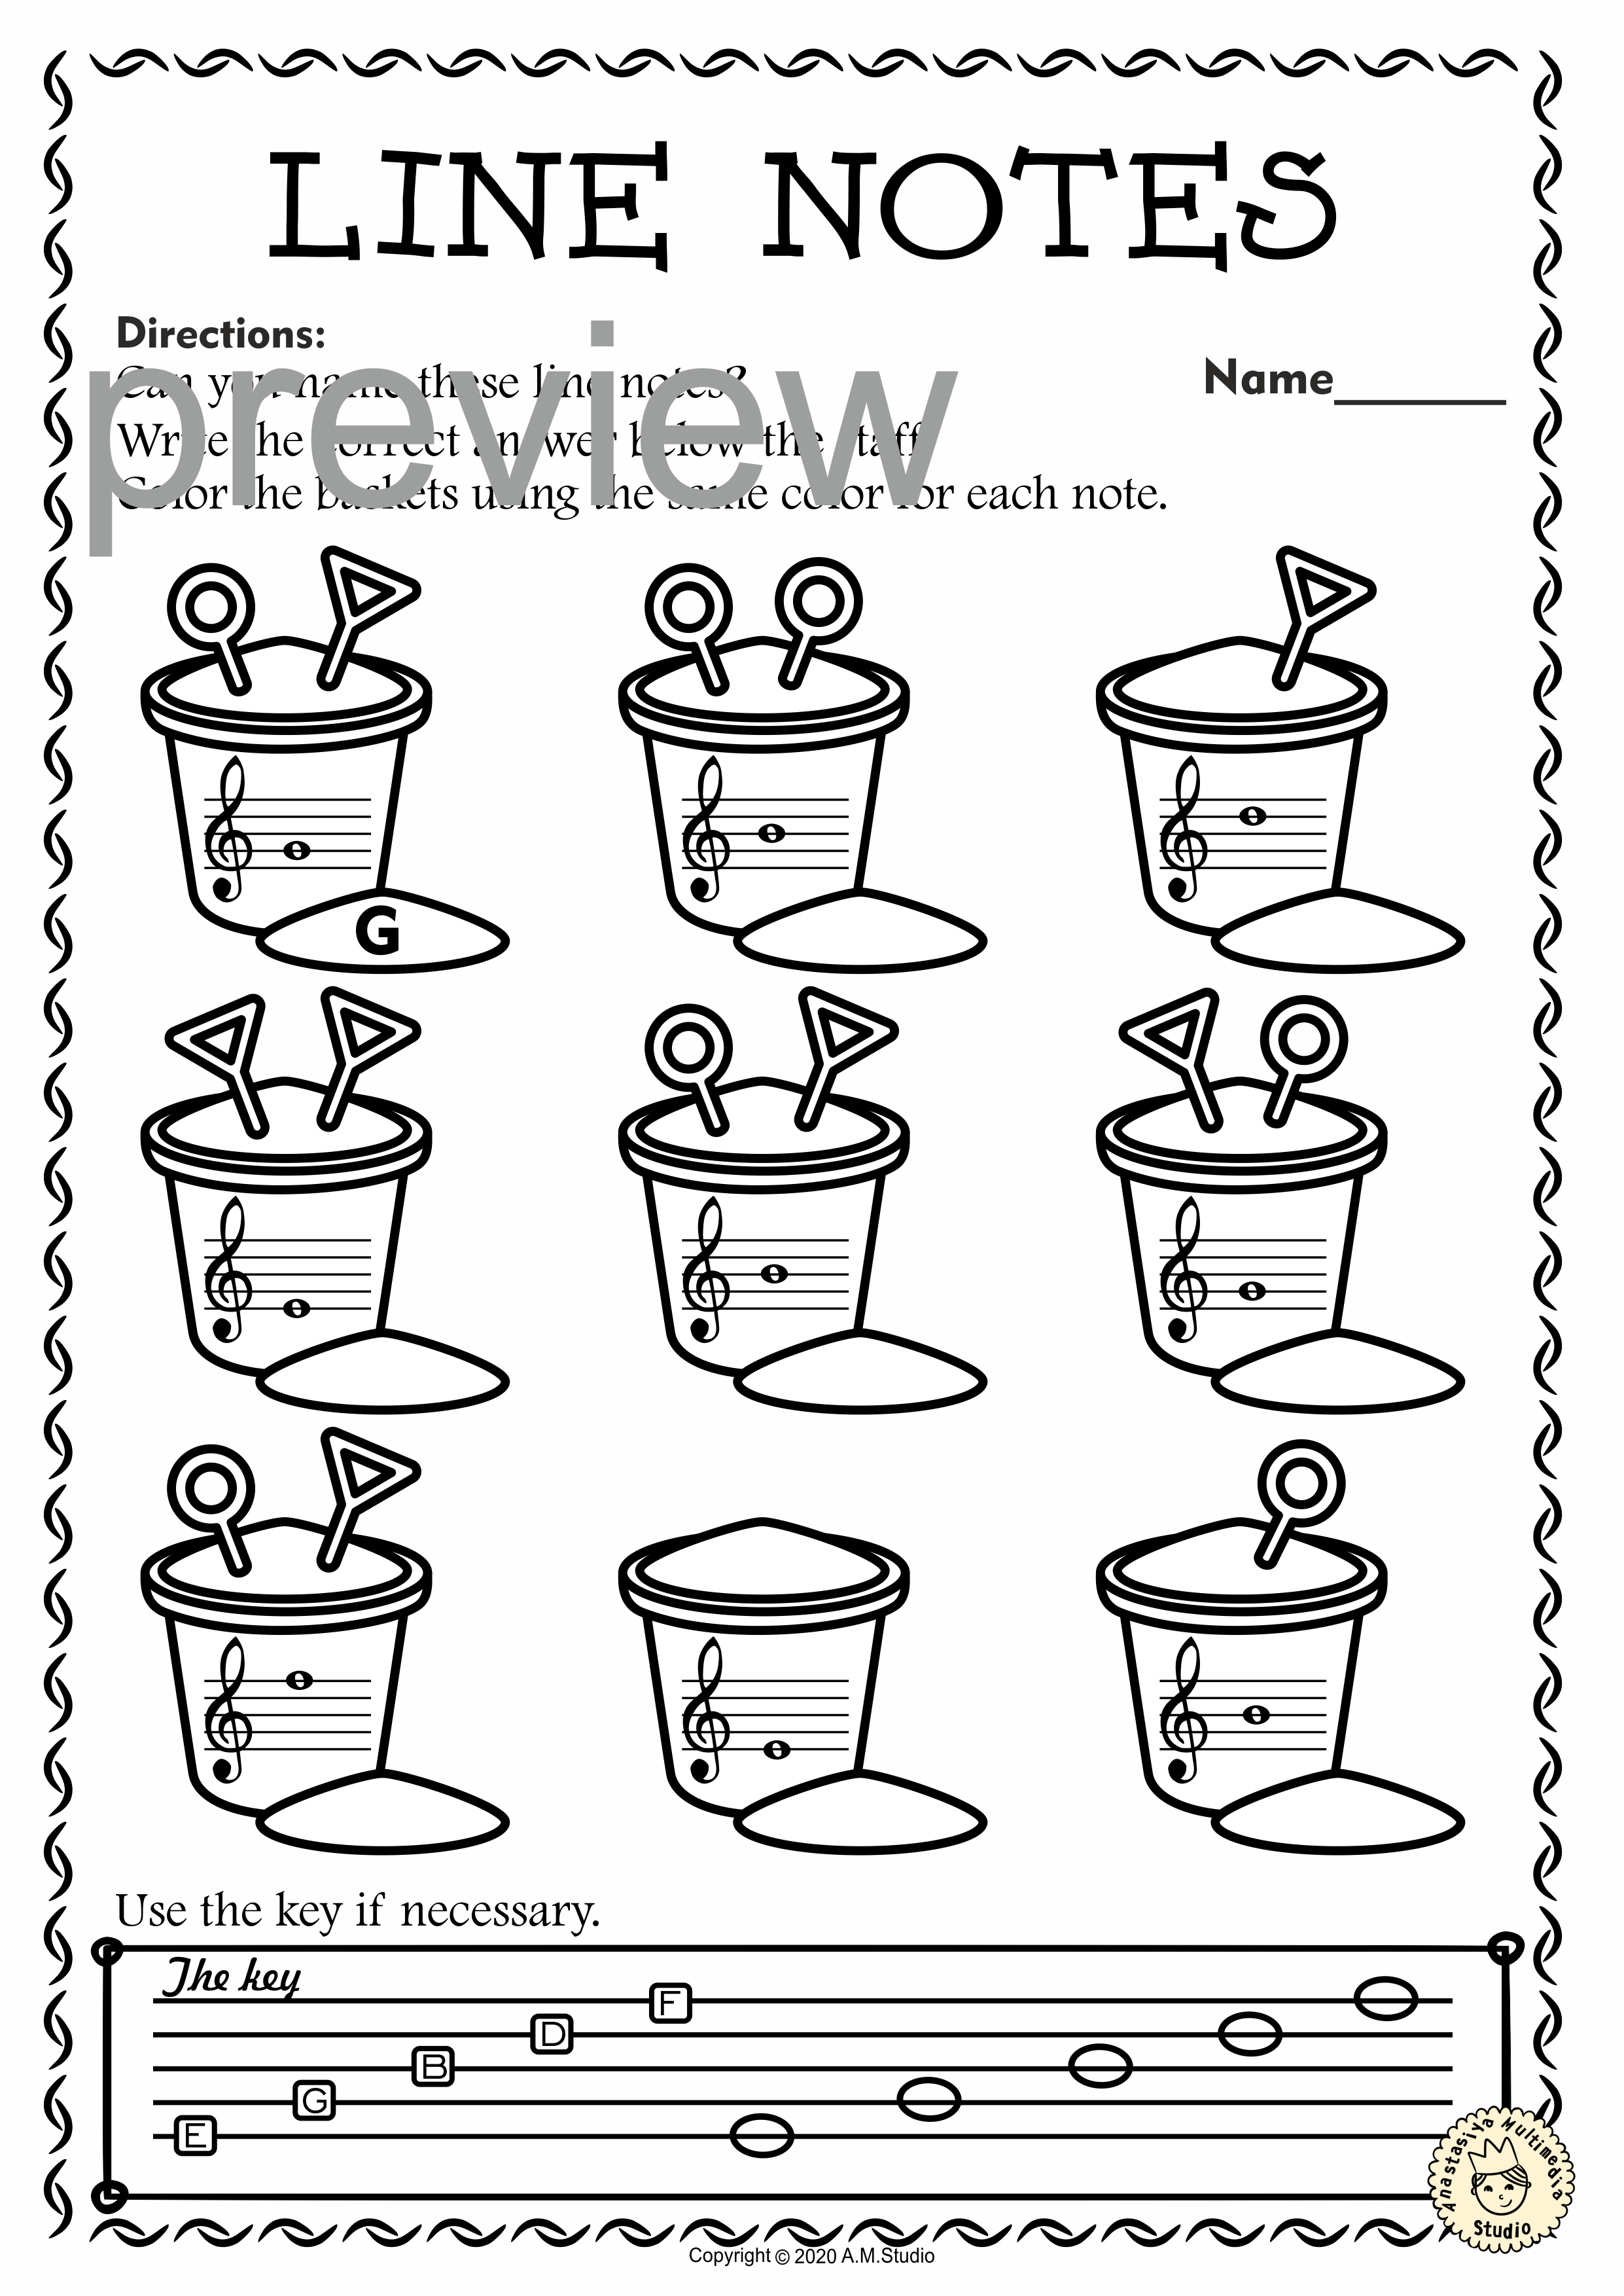 Treble Clef Note Naming Worksheets for Summer with answers (img # 1)